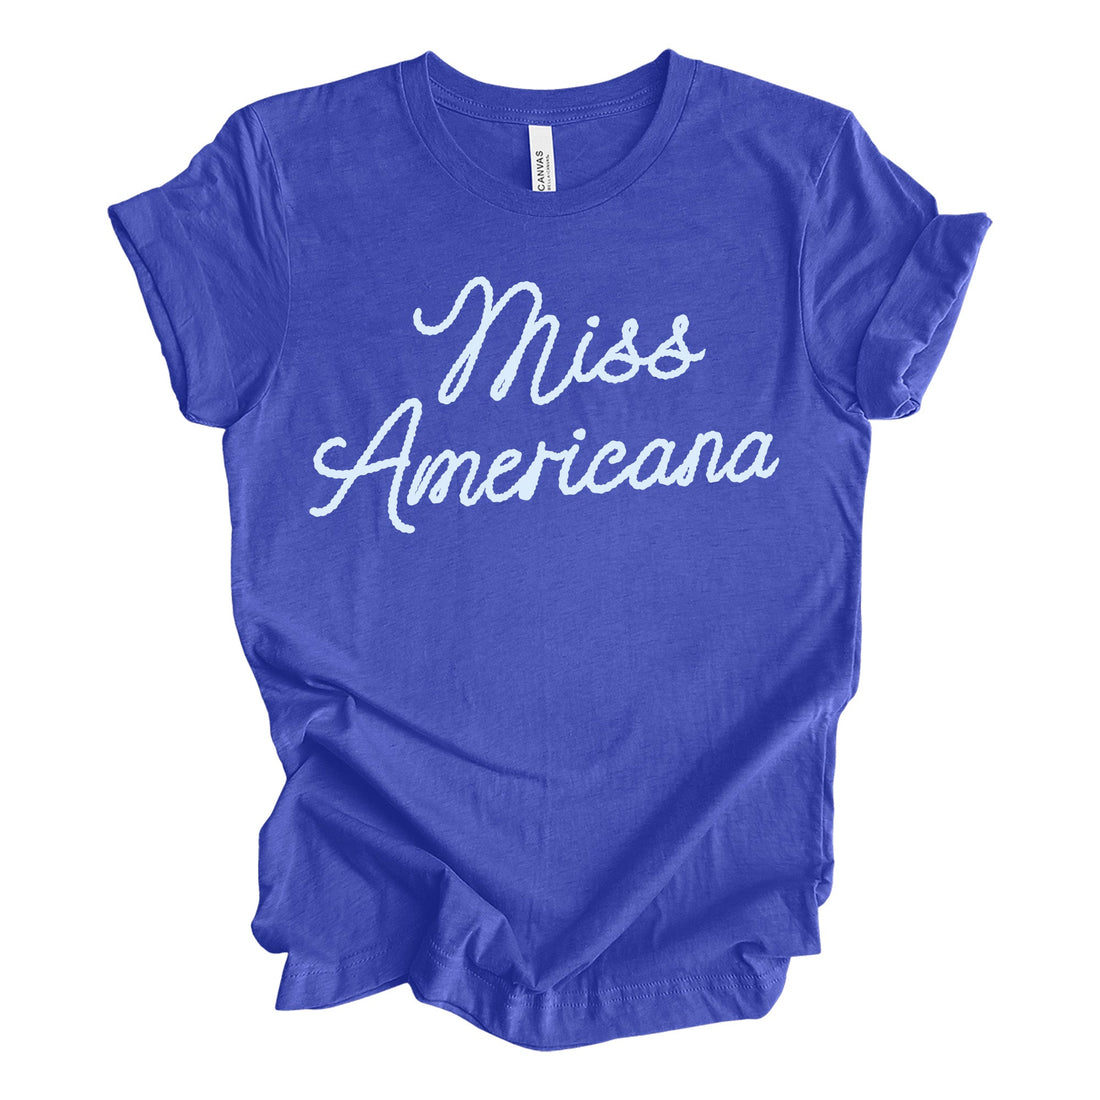 Miss Americana in Royal Blue